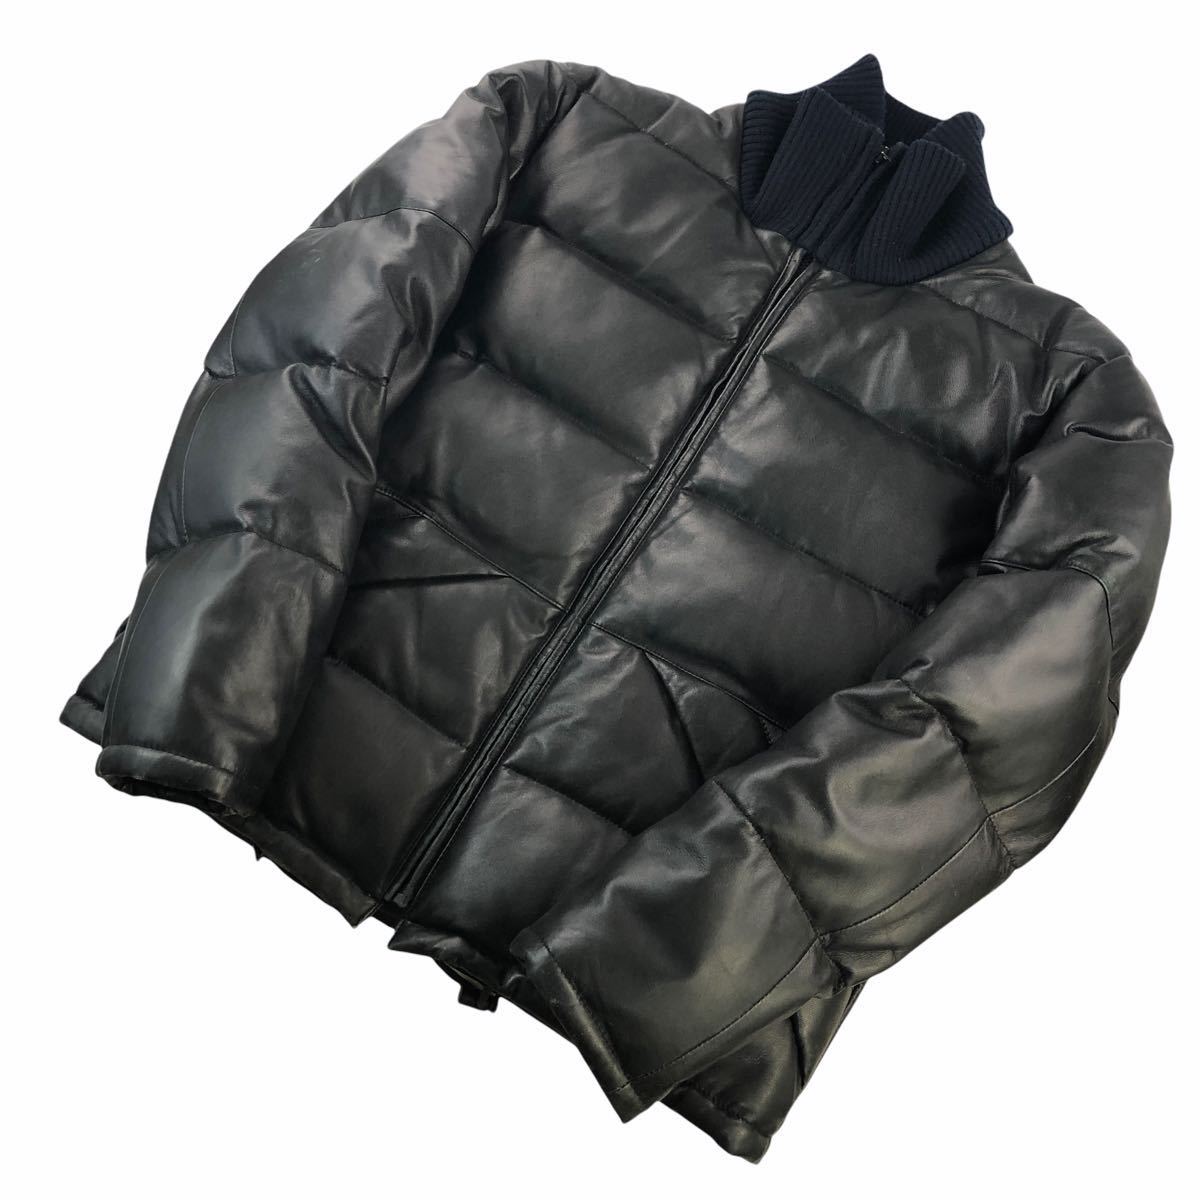  superior article rare AVIREX Avirex leather down jacket size L sheep leather black down feather thick meat thickness leather 611127 original leather autumn winter popular 